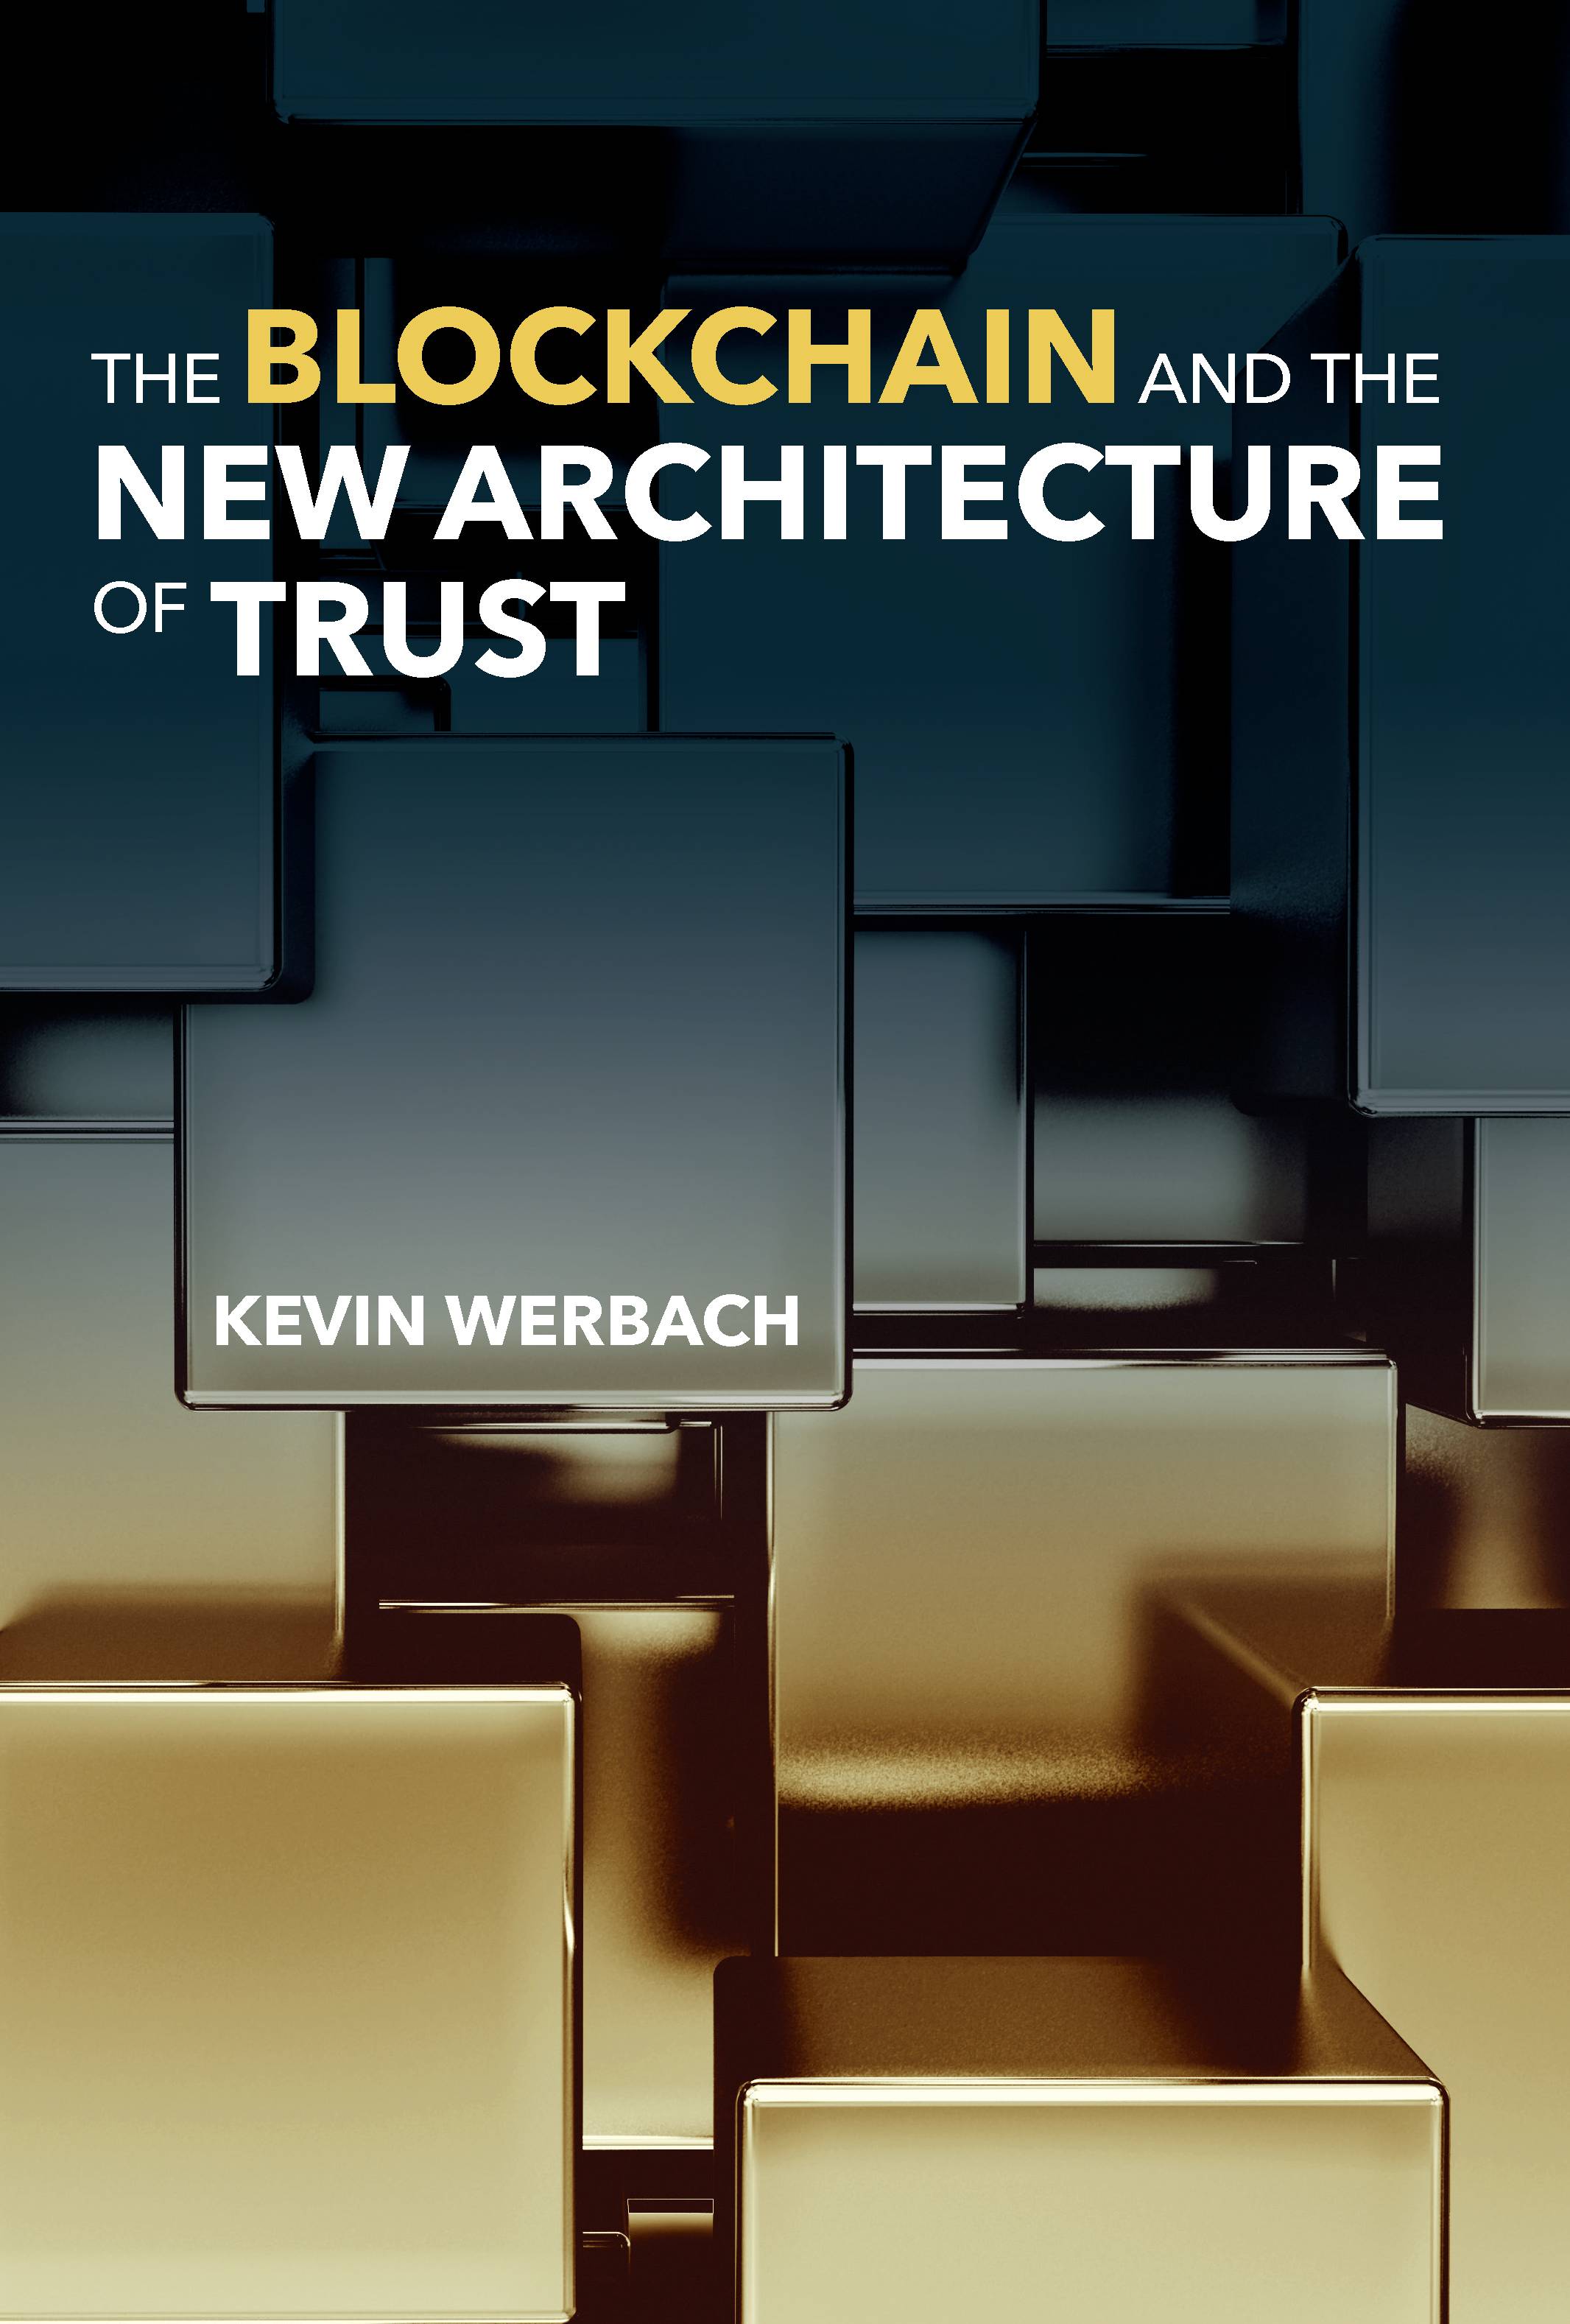 The Blockchain and the New Architecture of Trust